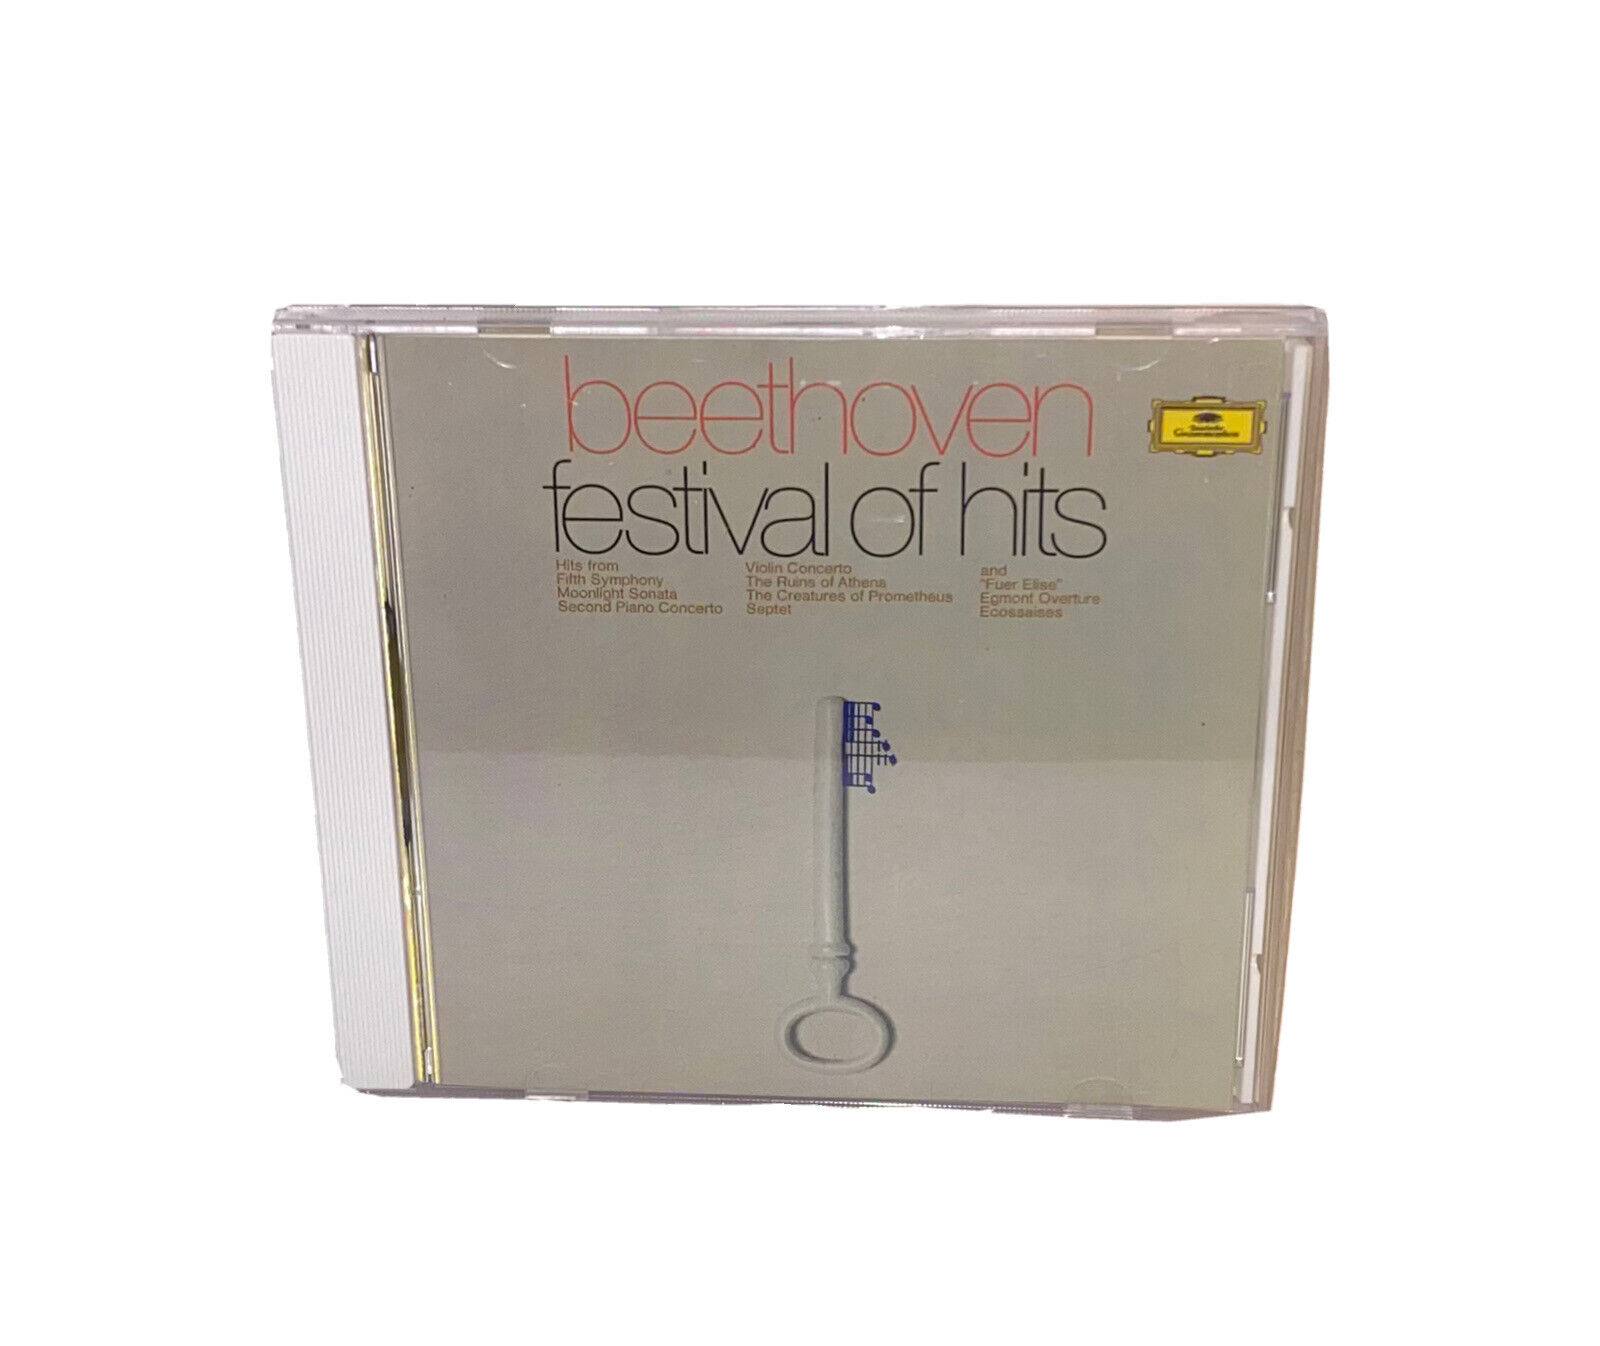 Beethoven Festival Of Hits - PolyGram Compact Disk CD -  TESTED